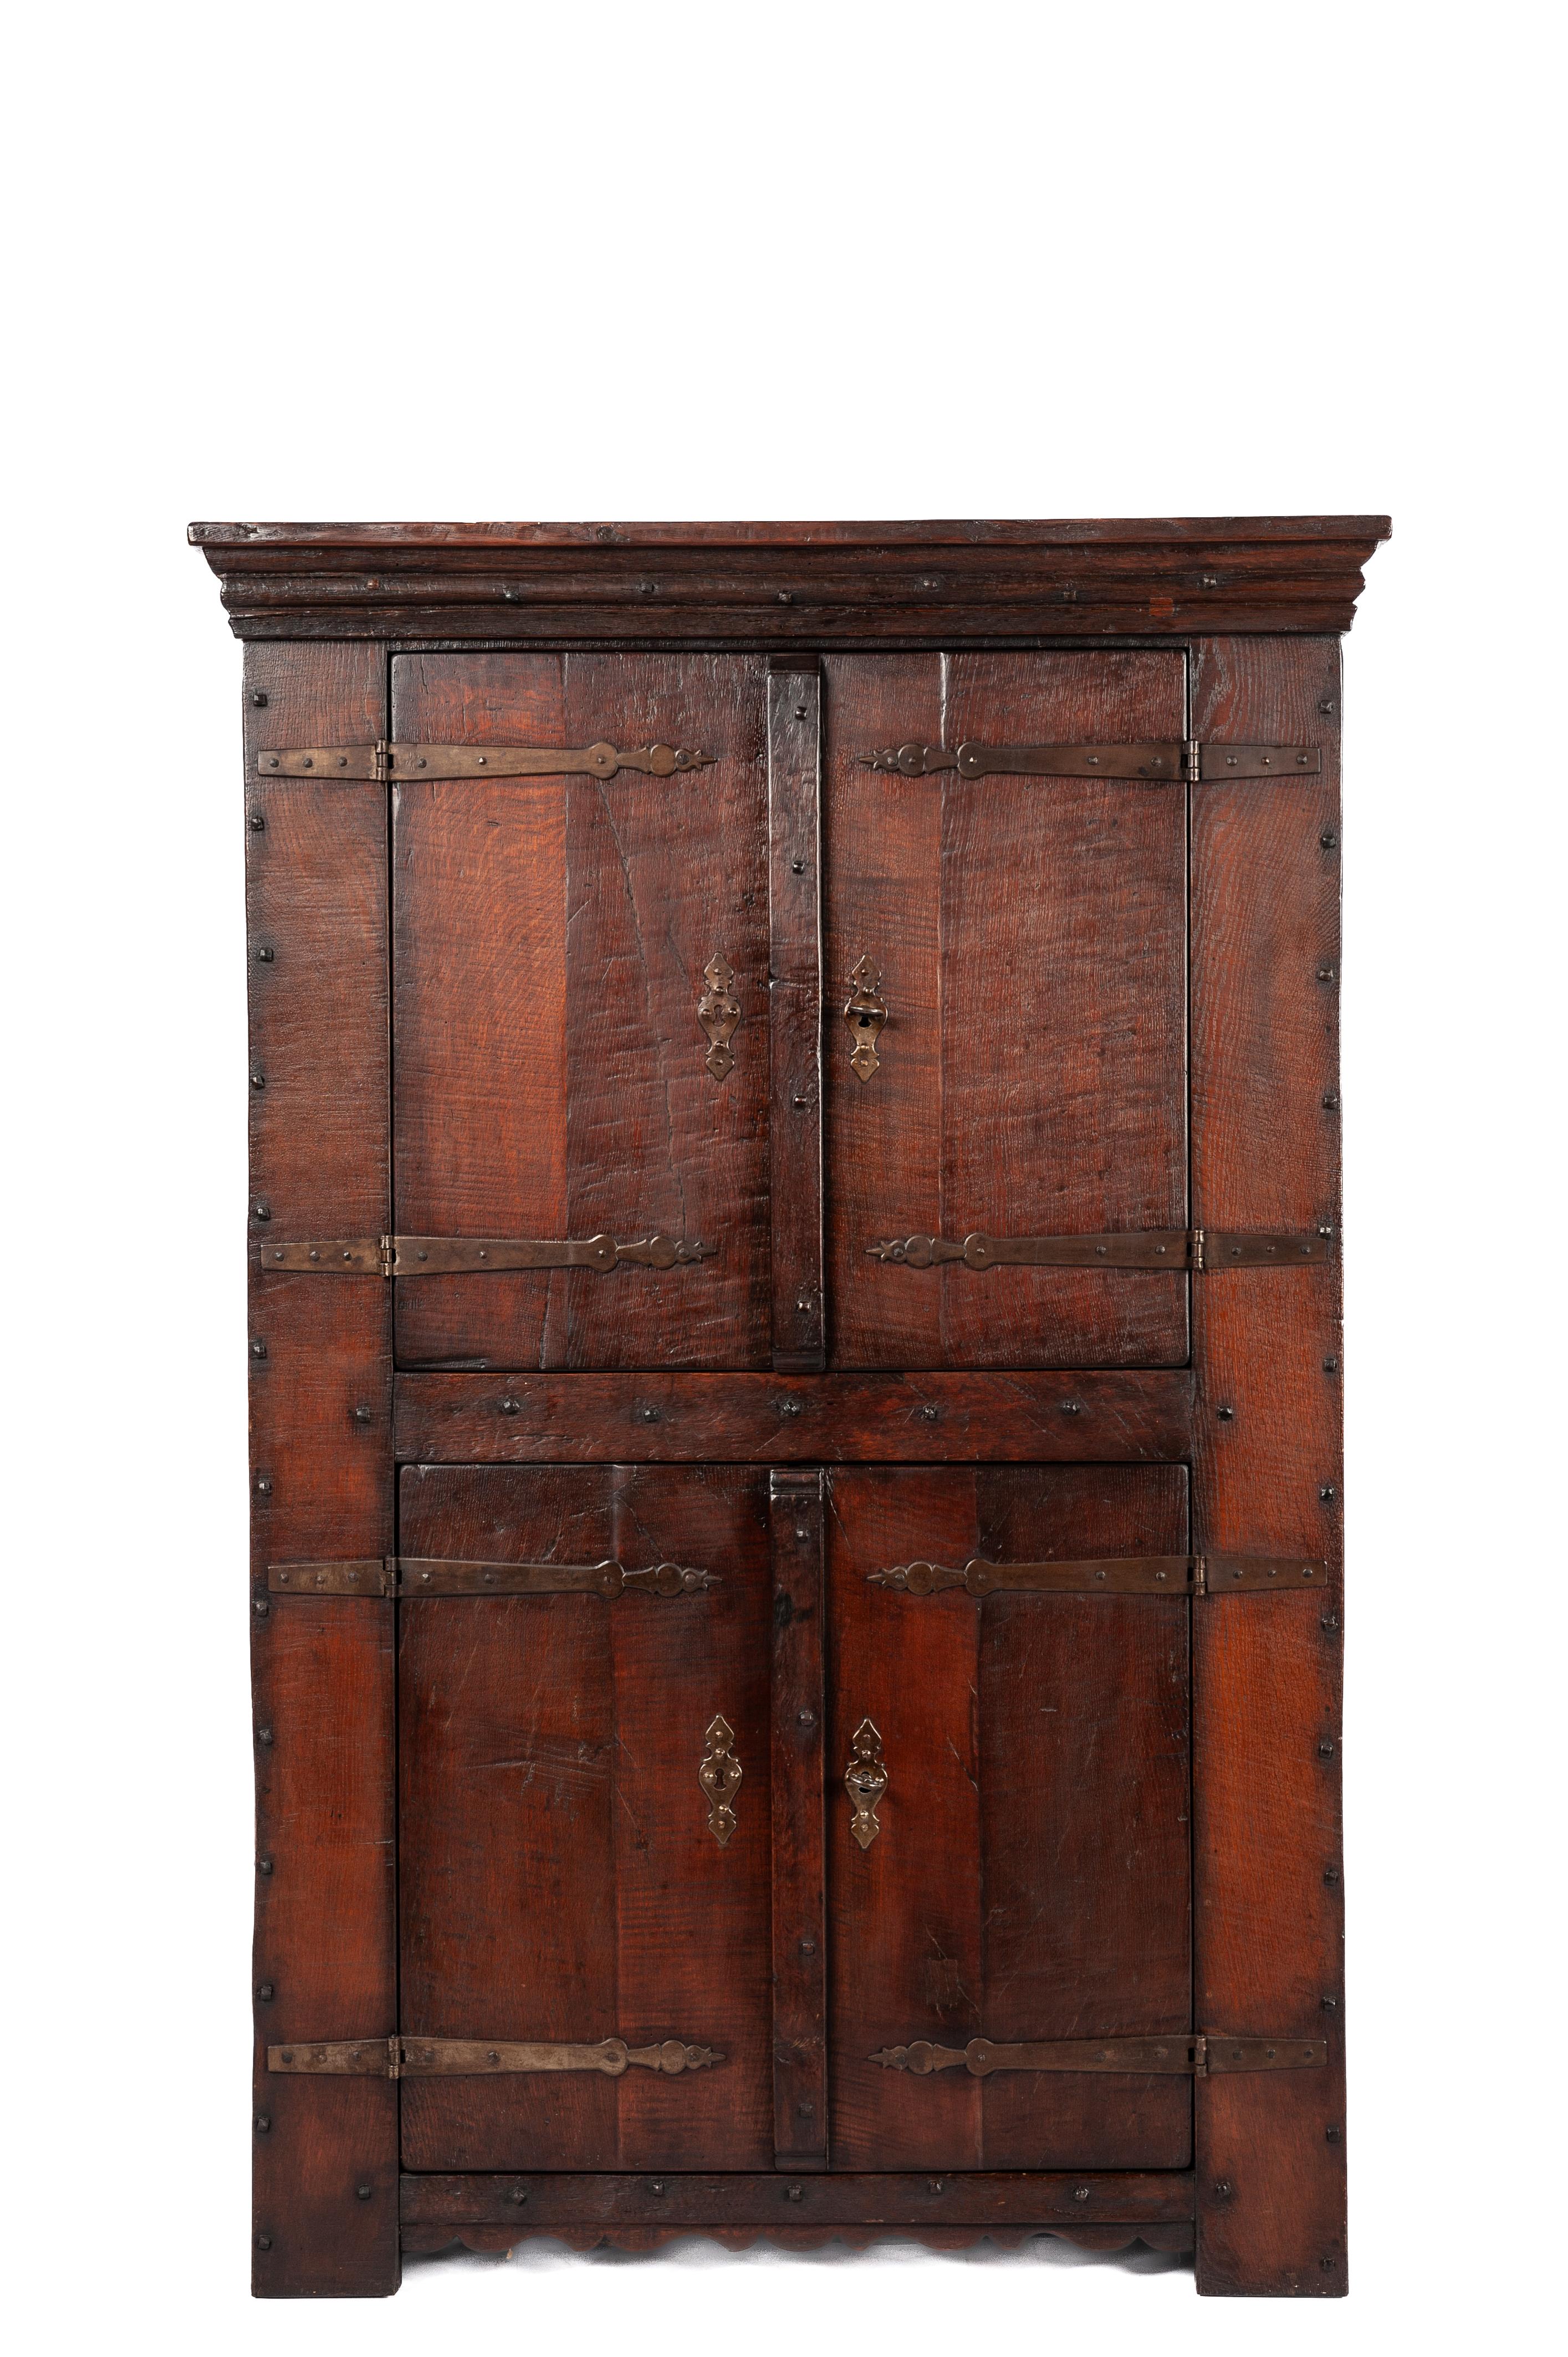 On offer here is a distinguished four-door oak cupboard, meticulously crafted from reclaimed oak wood dating back to the 1960s. This unique piece was built by the esteemed Piet Rombouts & Sons furniture workshop, a legacy proudly continued by our